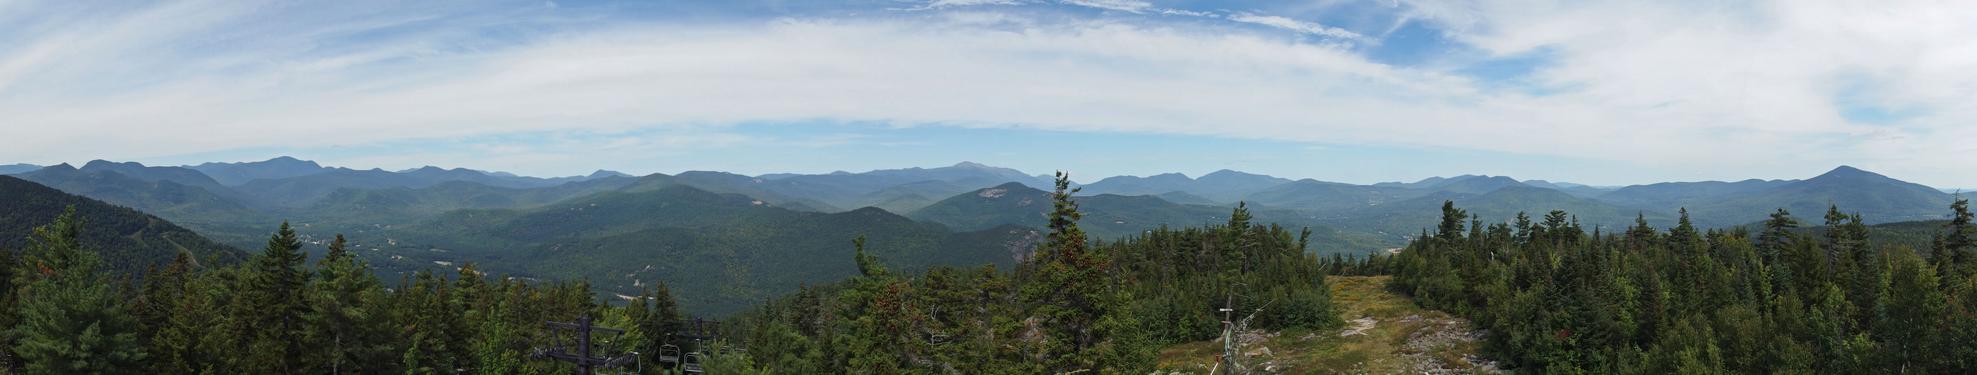 A view of the Presidentials as seen from Little Attitash Mountain in NH on September 2018